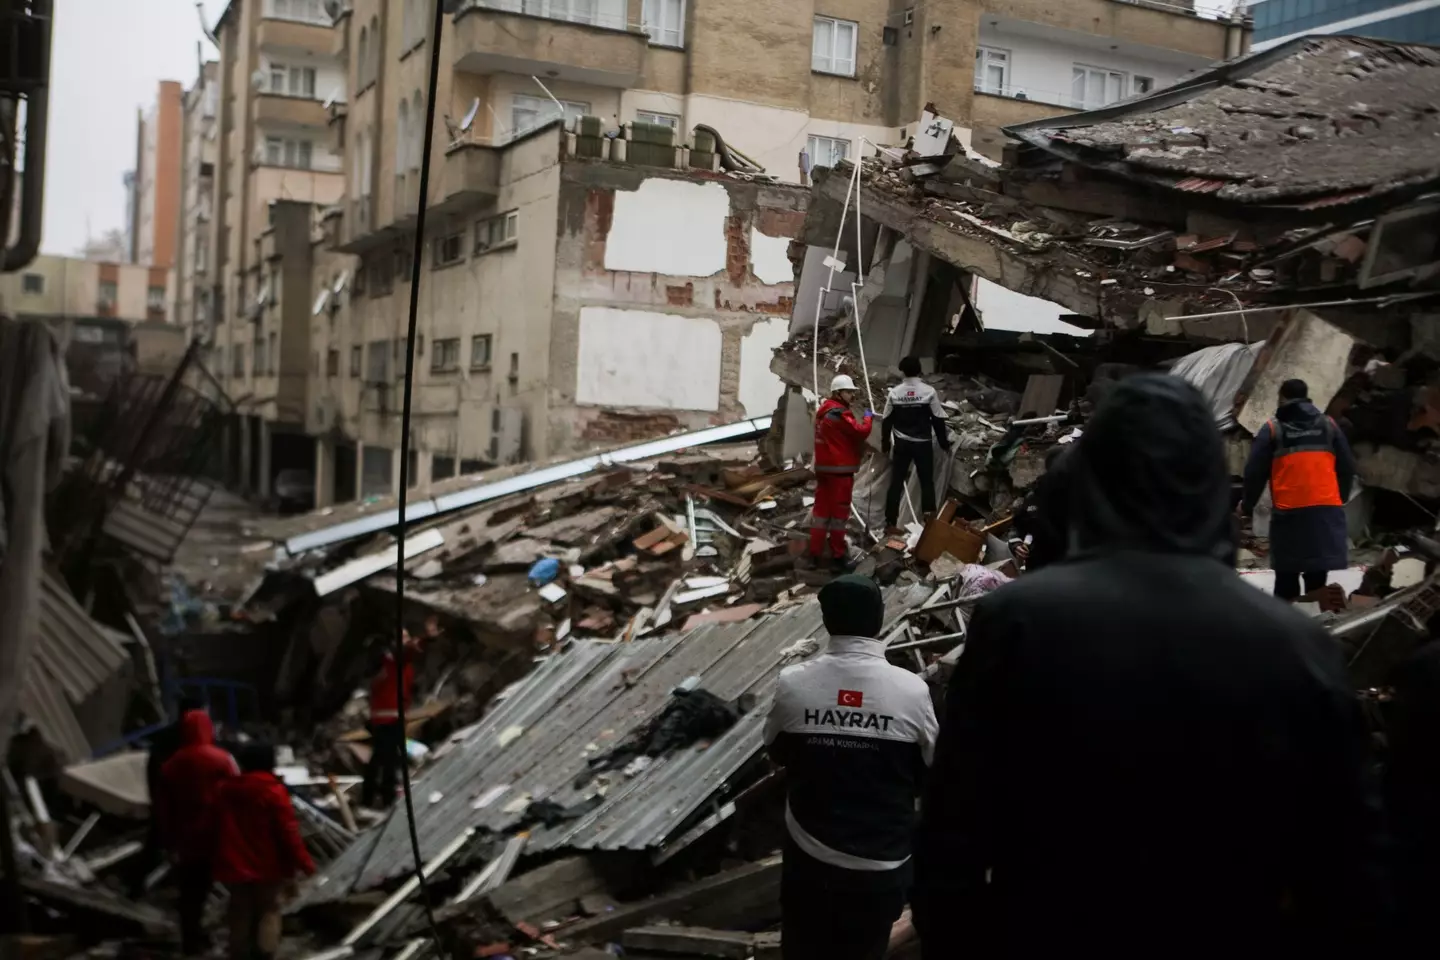 Rescuers operations are undertaken to save people trapped beneath the rubble.